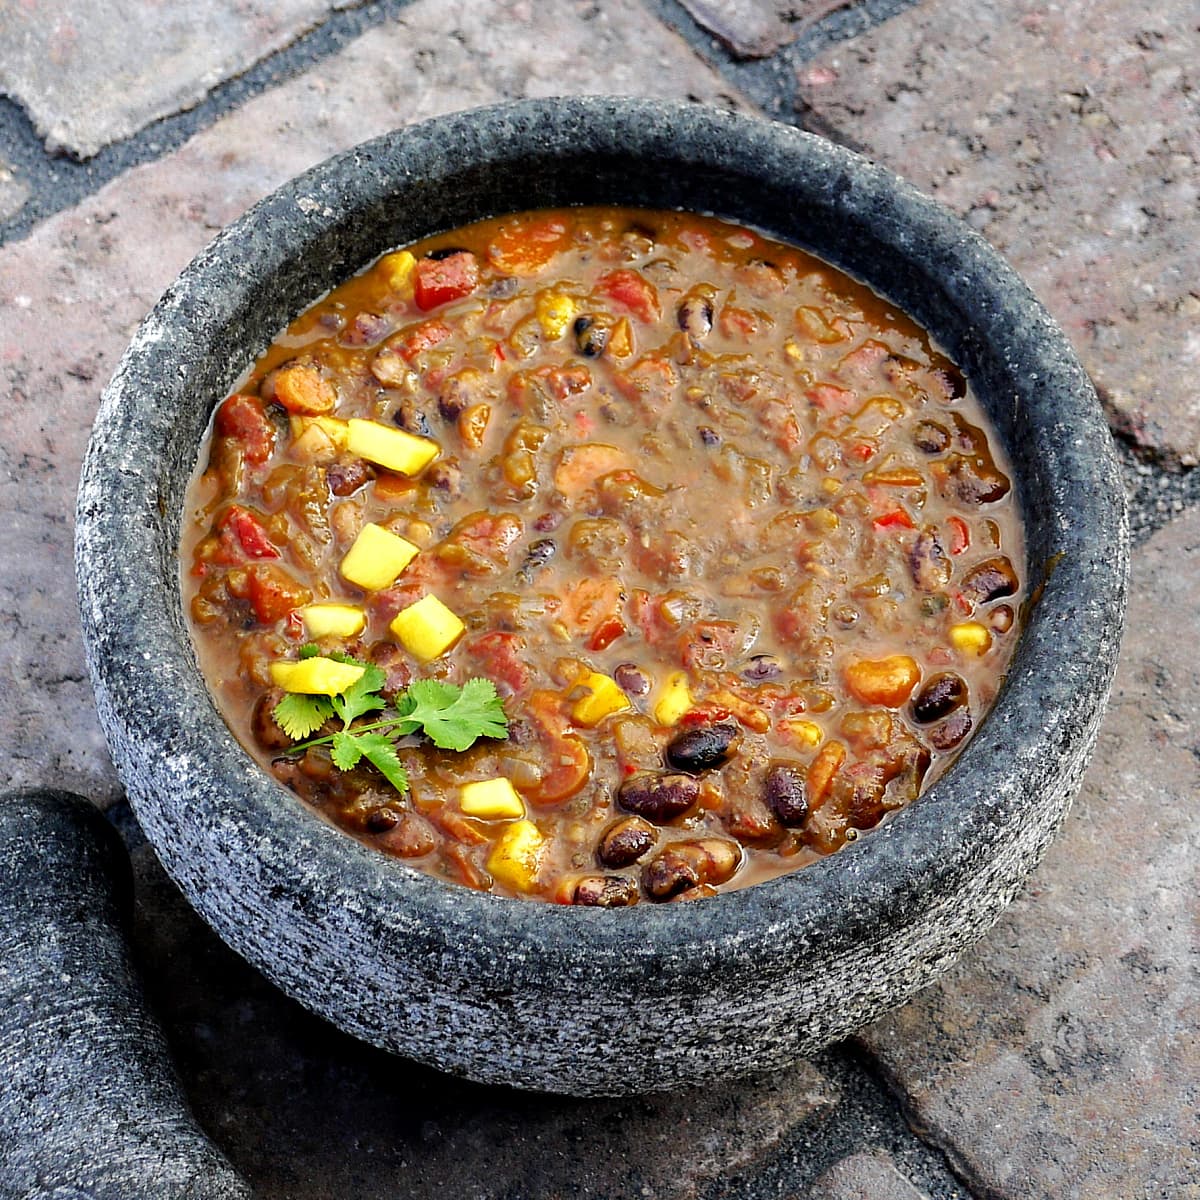 Chili in a stone bowl, garnished with diced mango and cilantro.